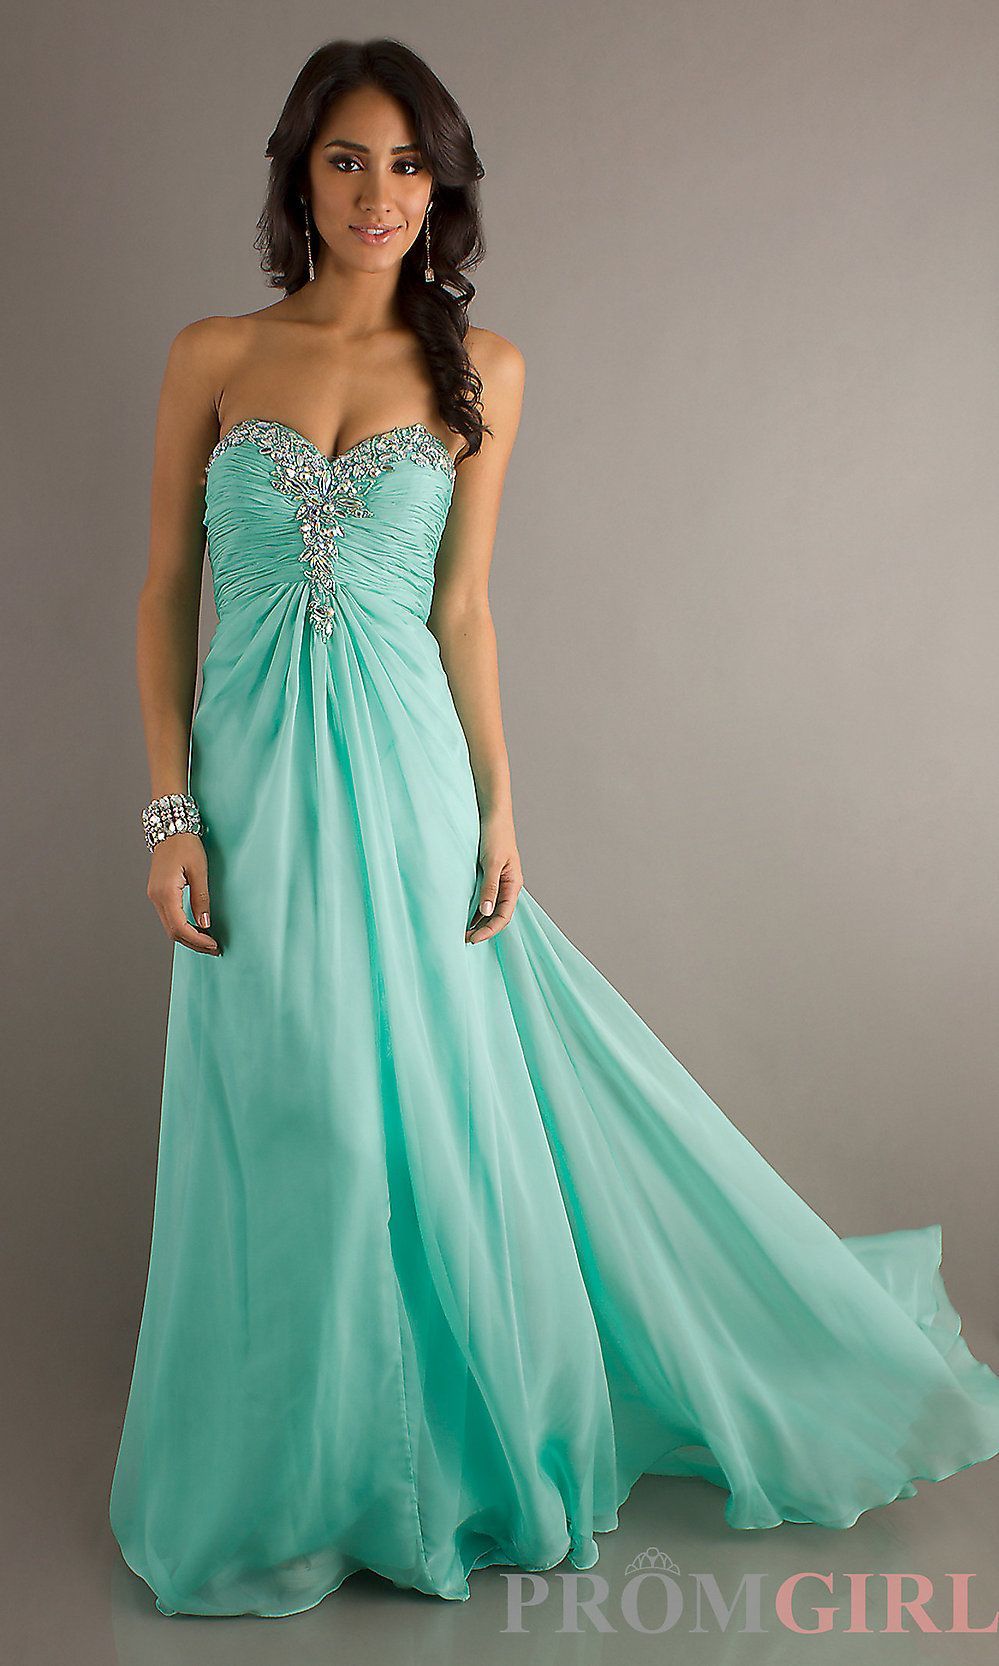 cute dress for prom or other special